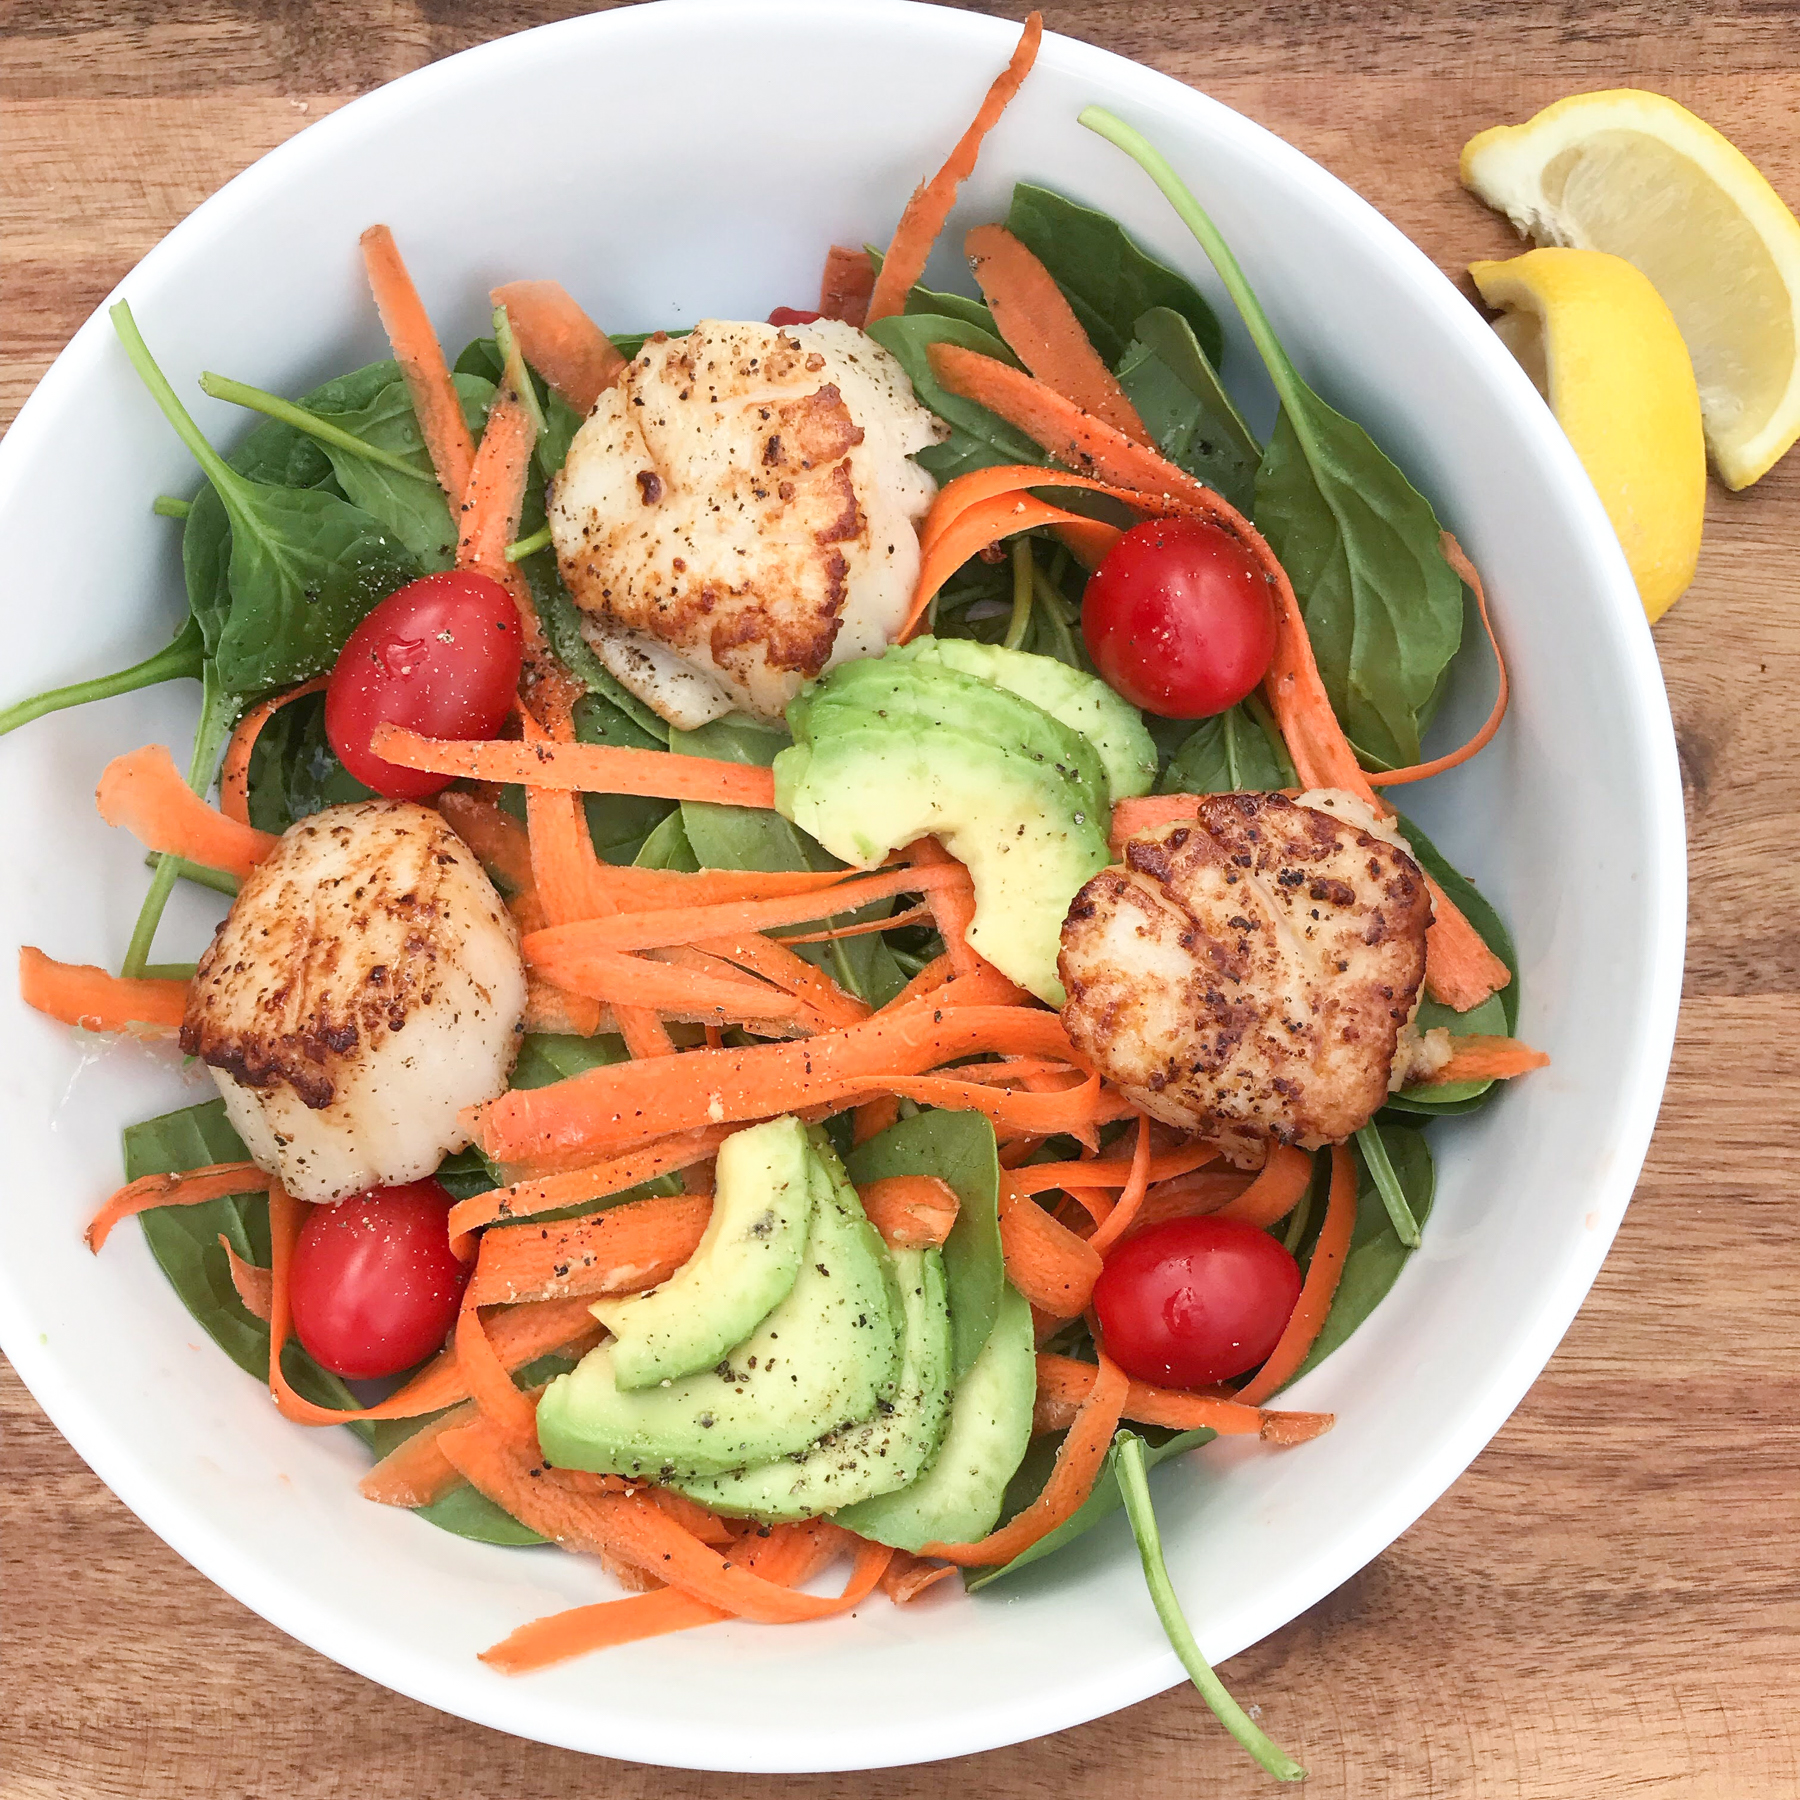 Seared Scallops spinach salad for a healthy lunch or dinner.  - Low Carb - Paleo- Gluten Free- FWTFL, Keto